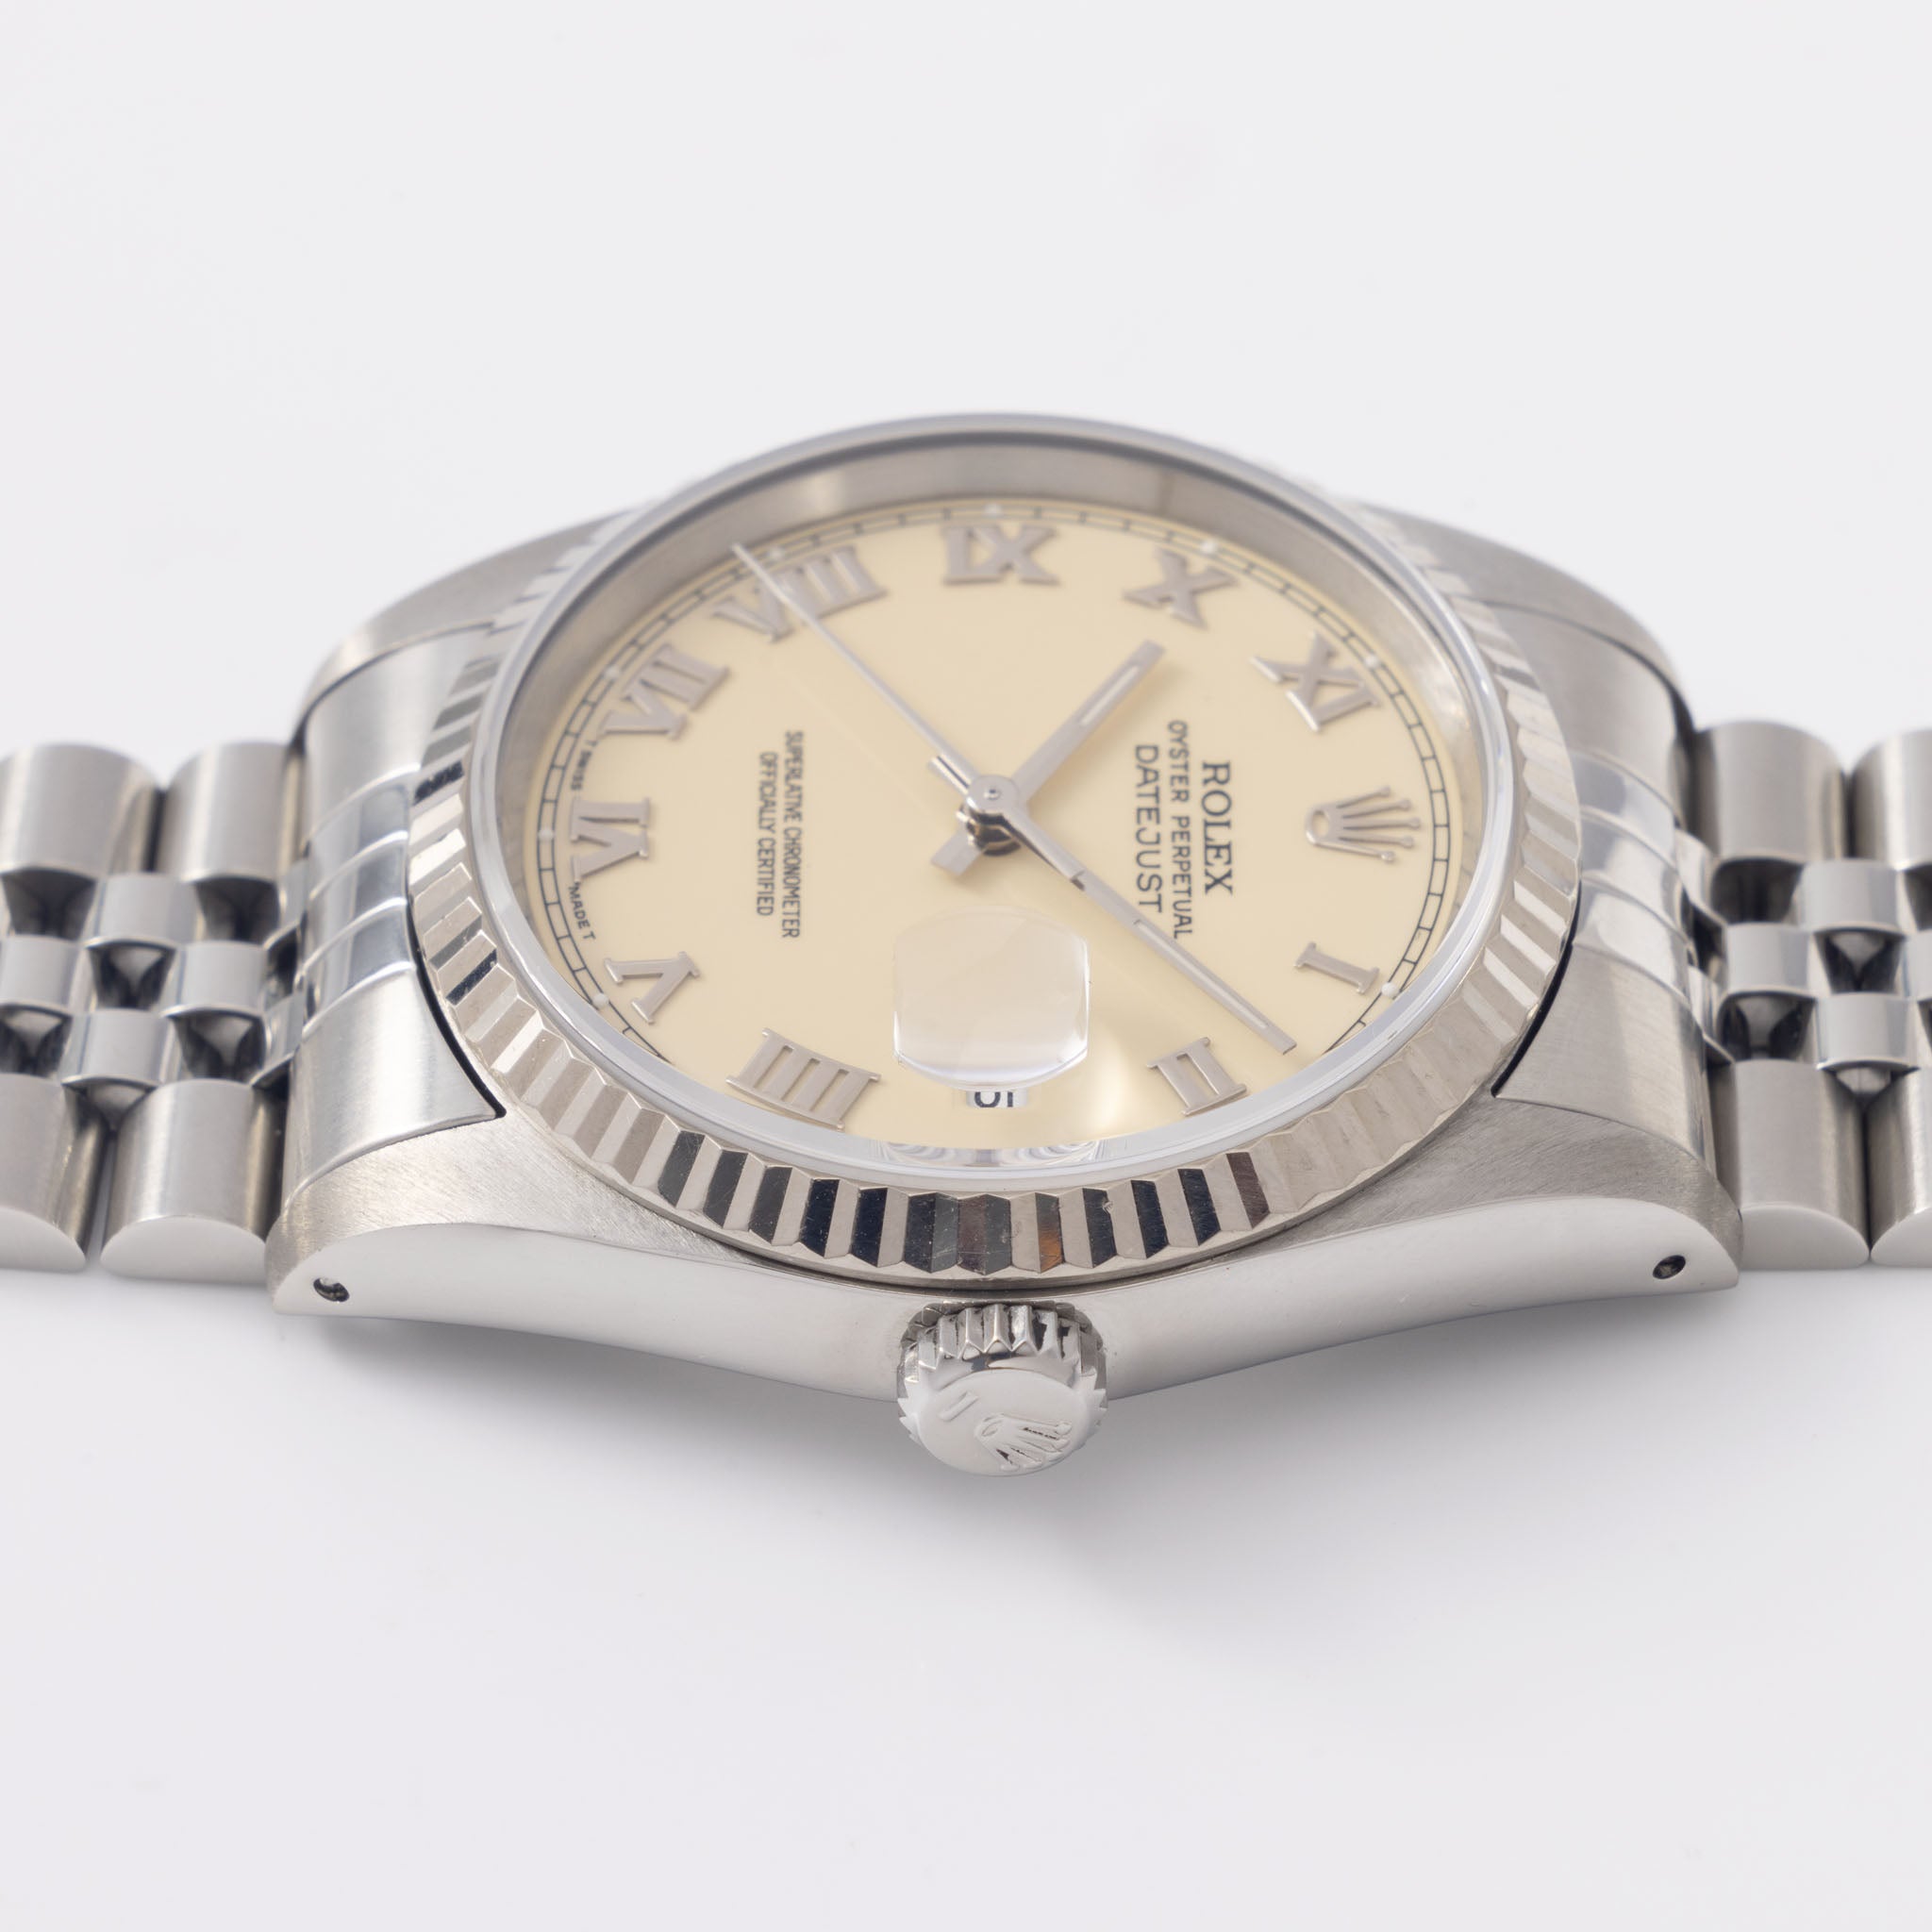 Rolex Datejust Cream Dial with Roman Hours Ref 16234